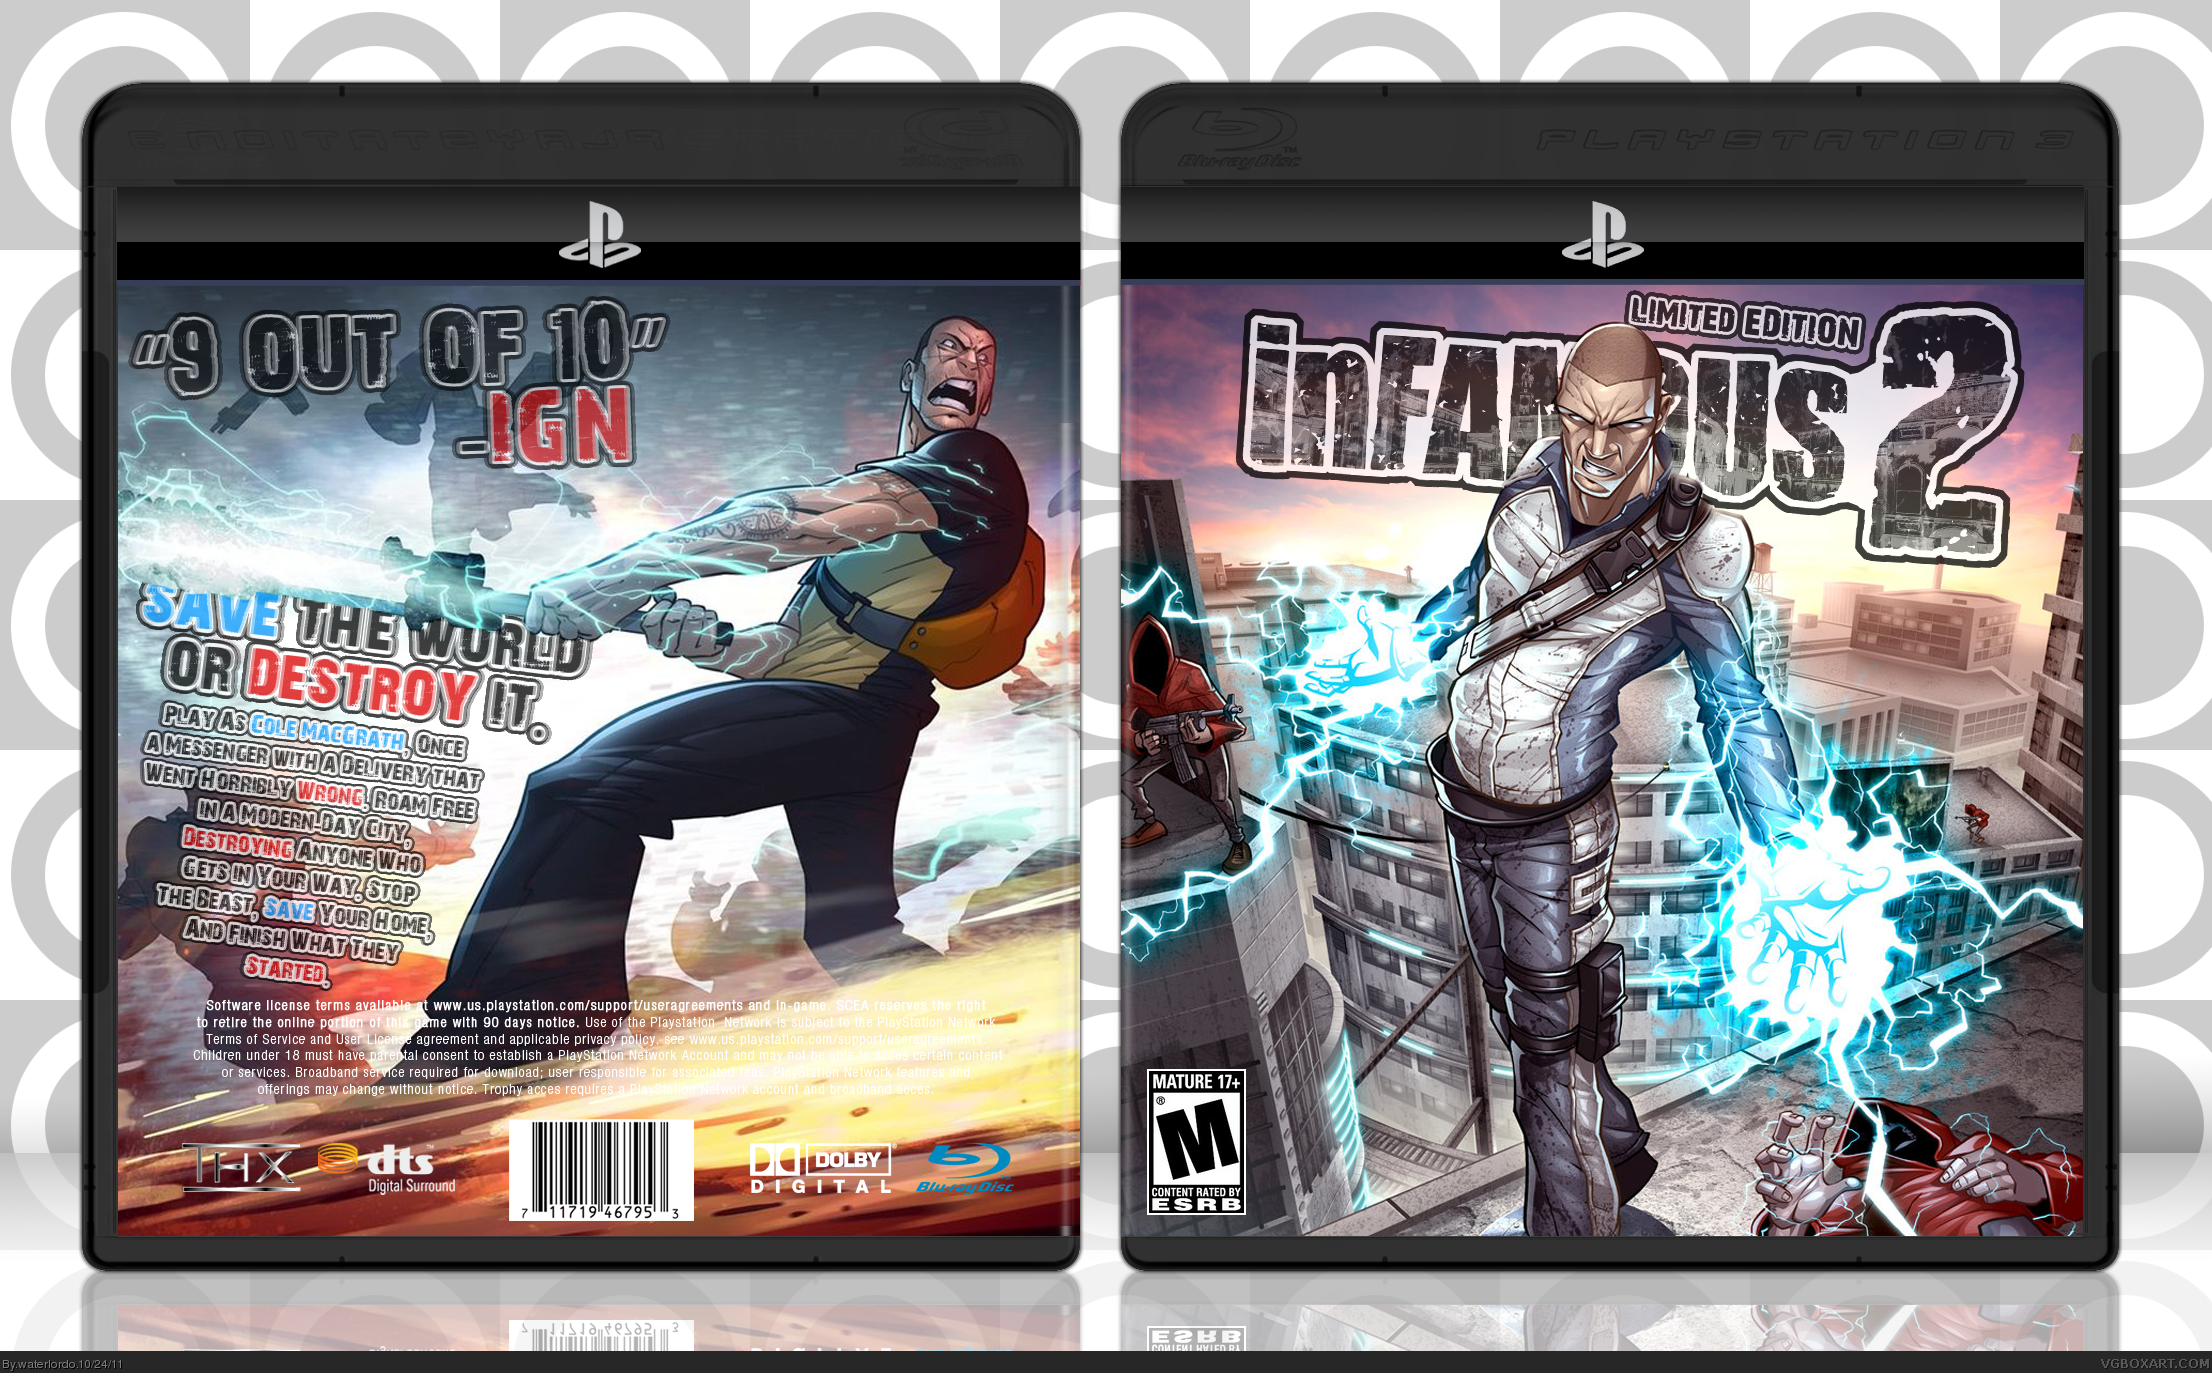 inFAMOUS 2: Limited Edition box cover